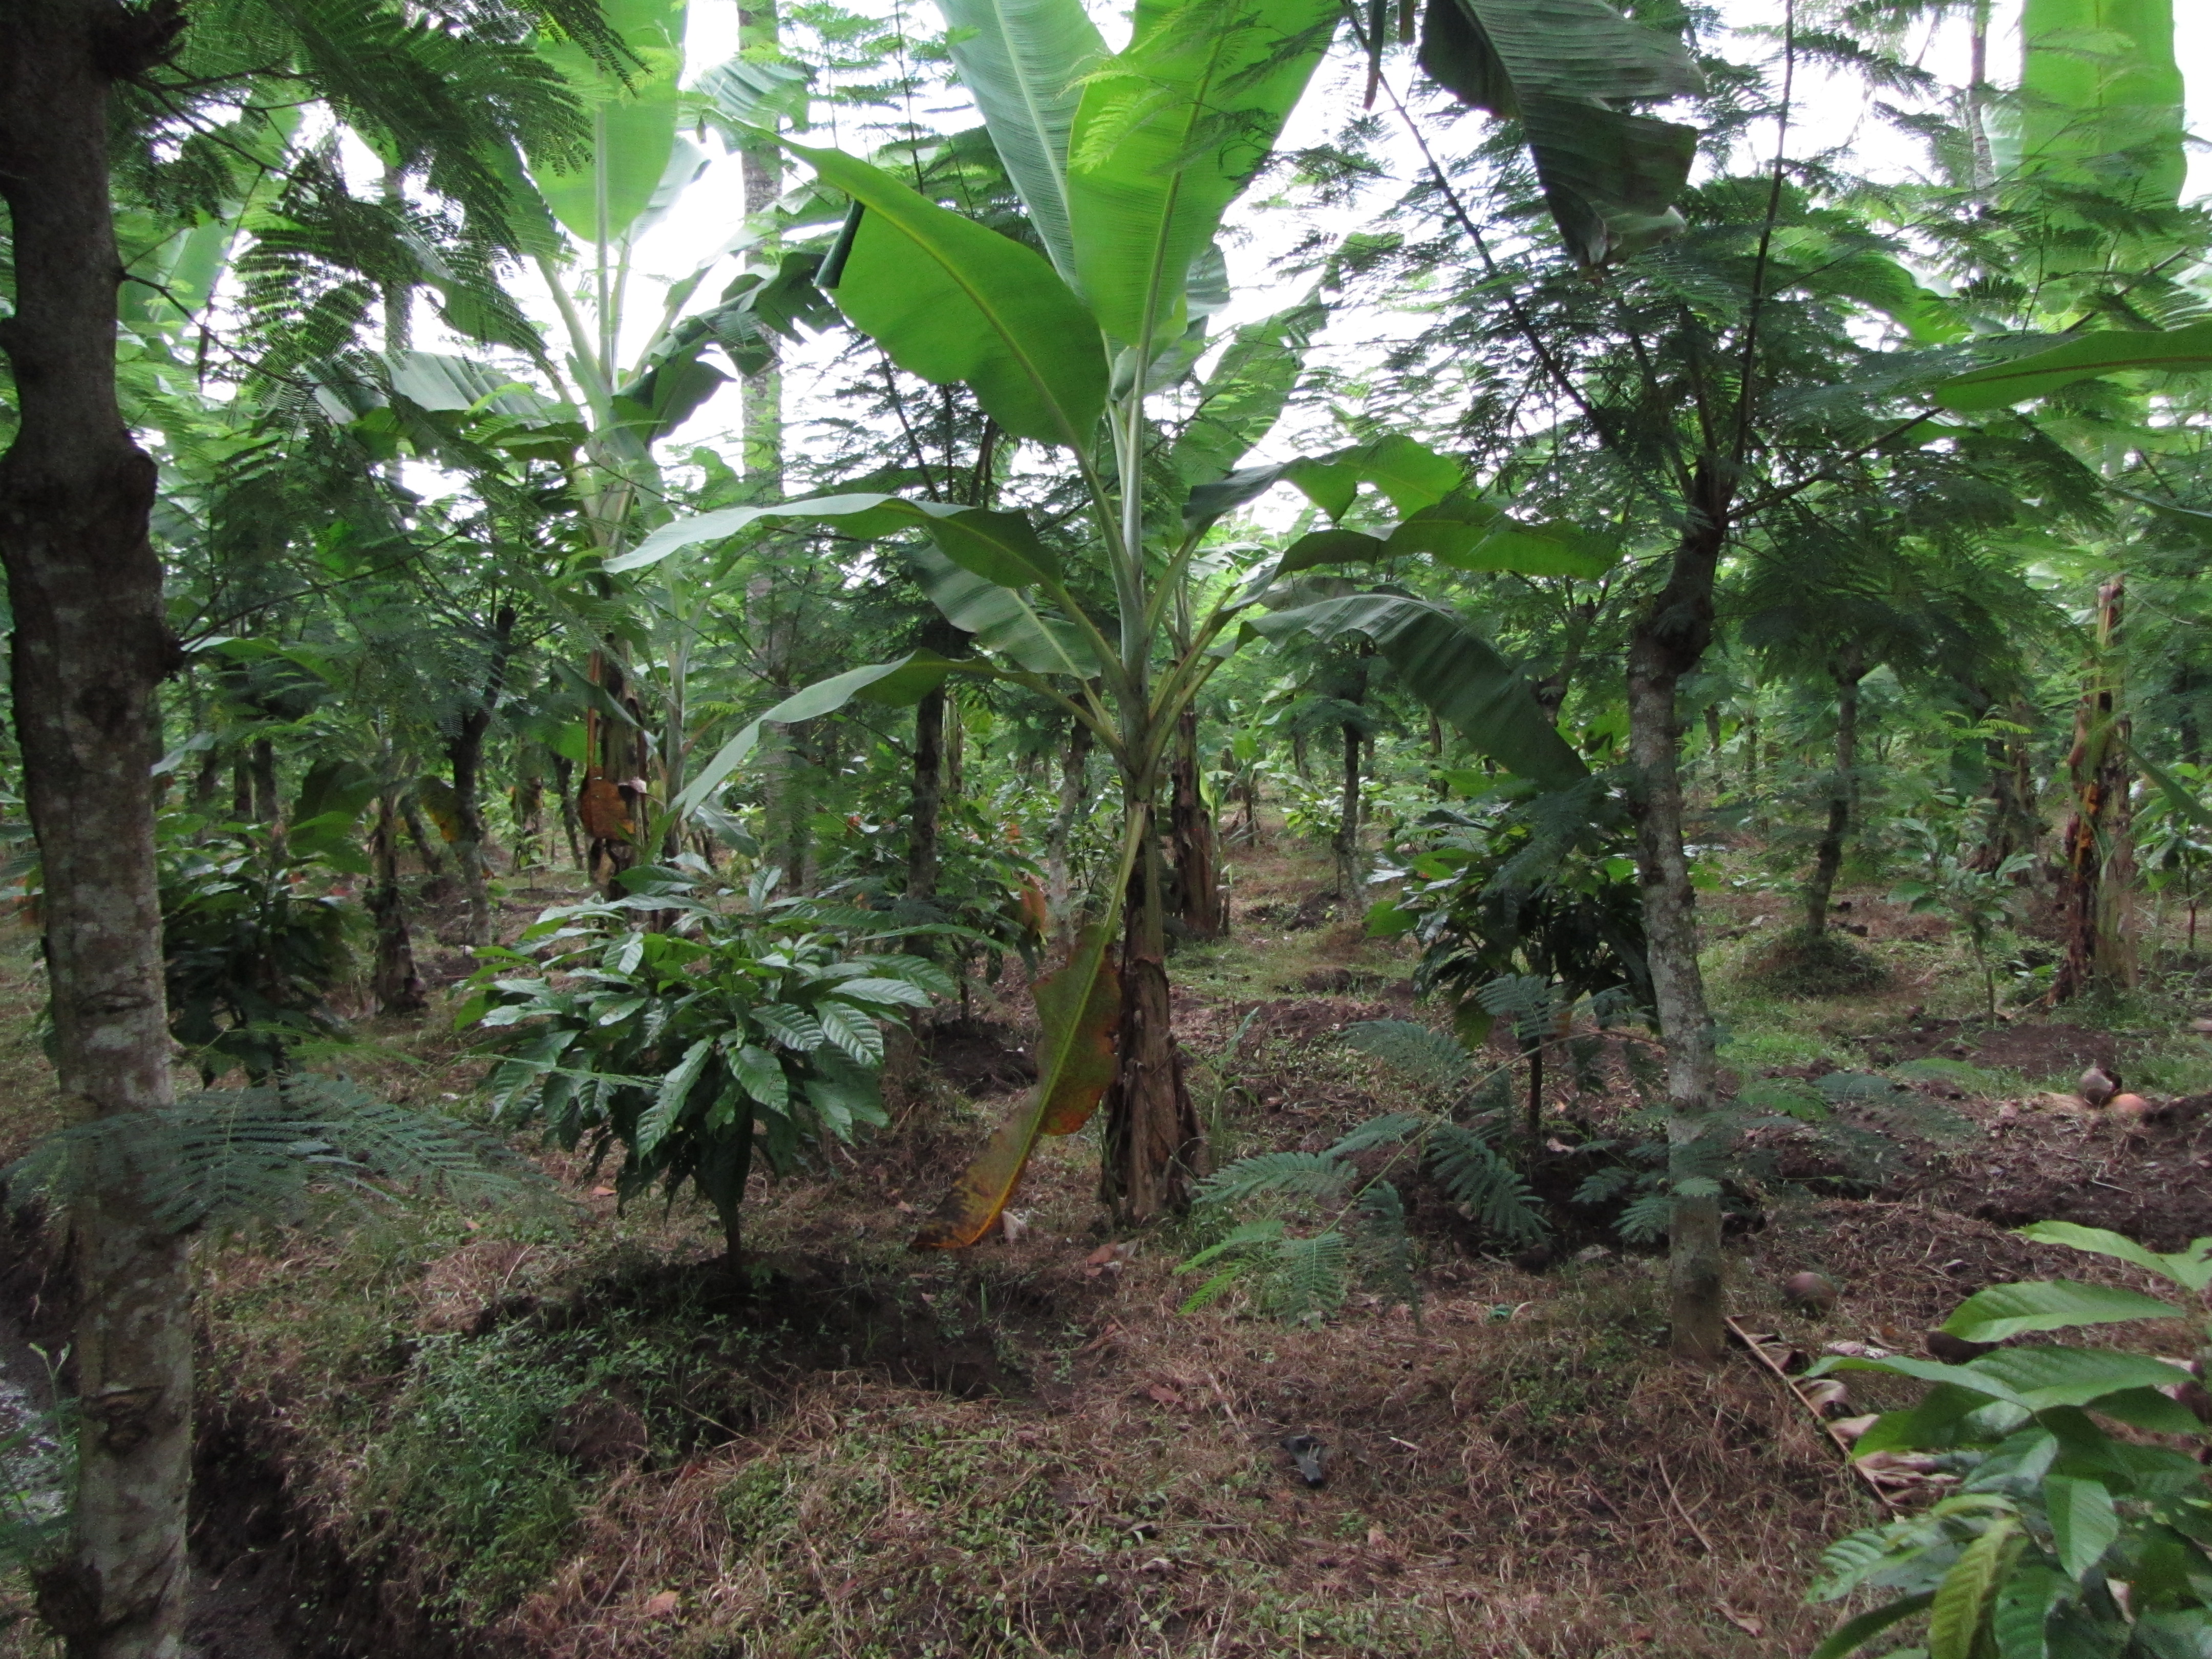 Immature cocoa agroforestry